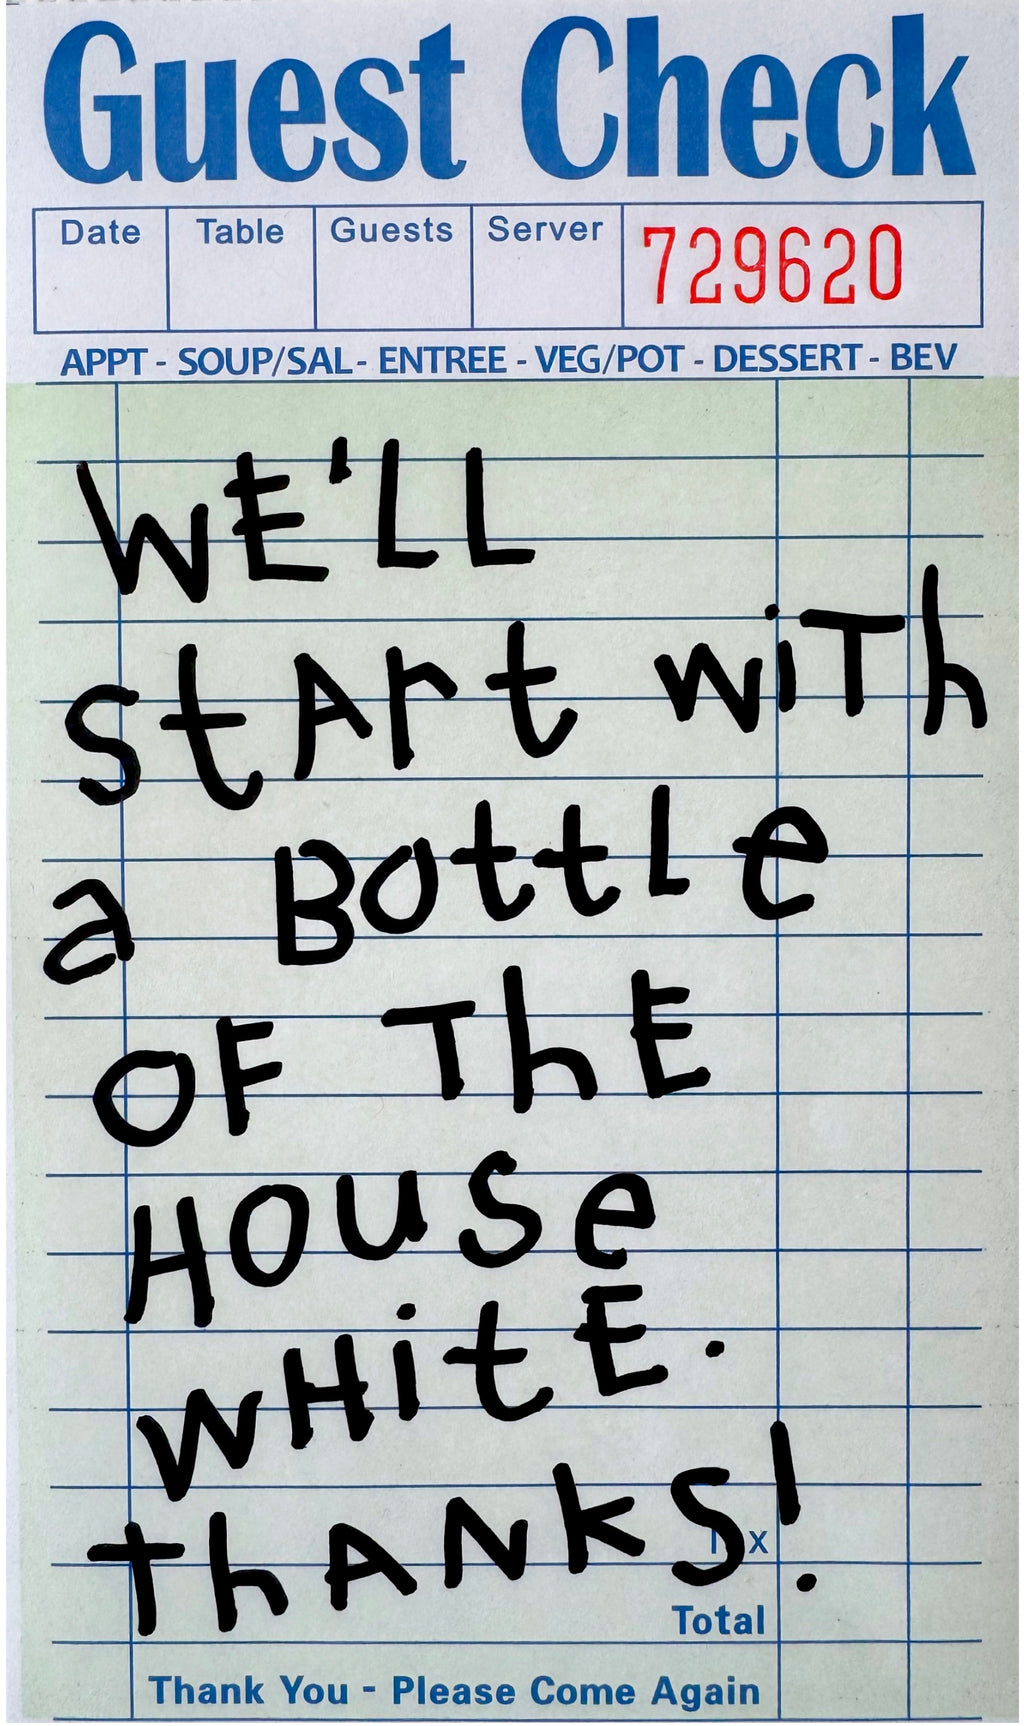 Bottle of the House White - 12x18in